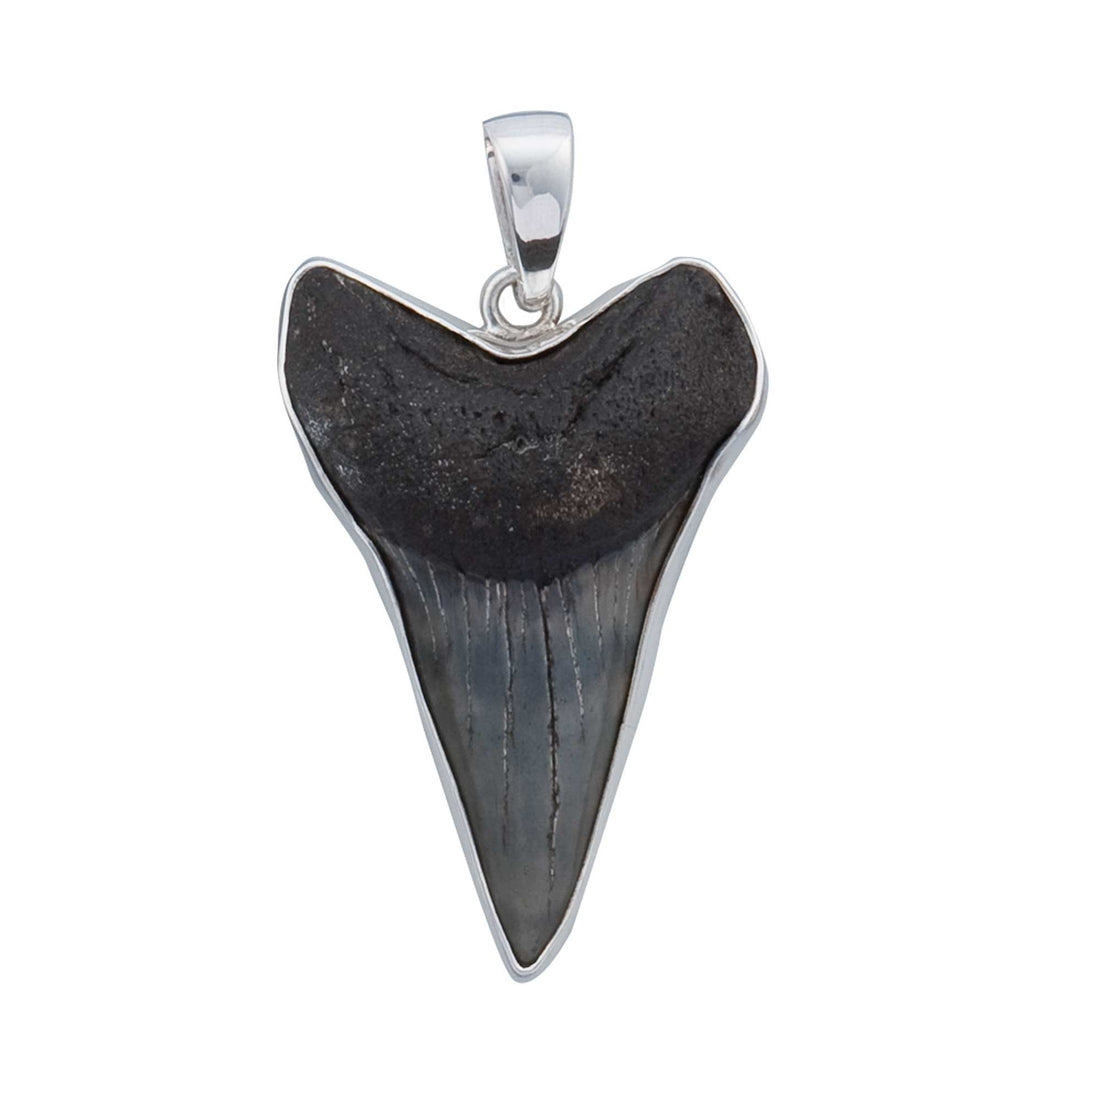 Fossil Shark Tooth Pendant - Mounted in Sterling Silver